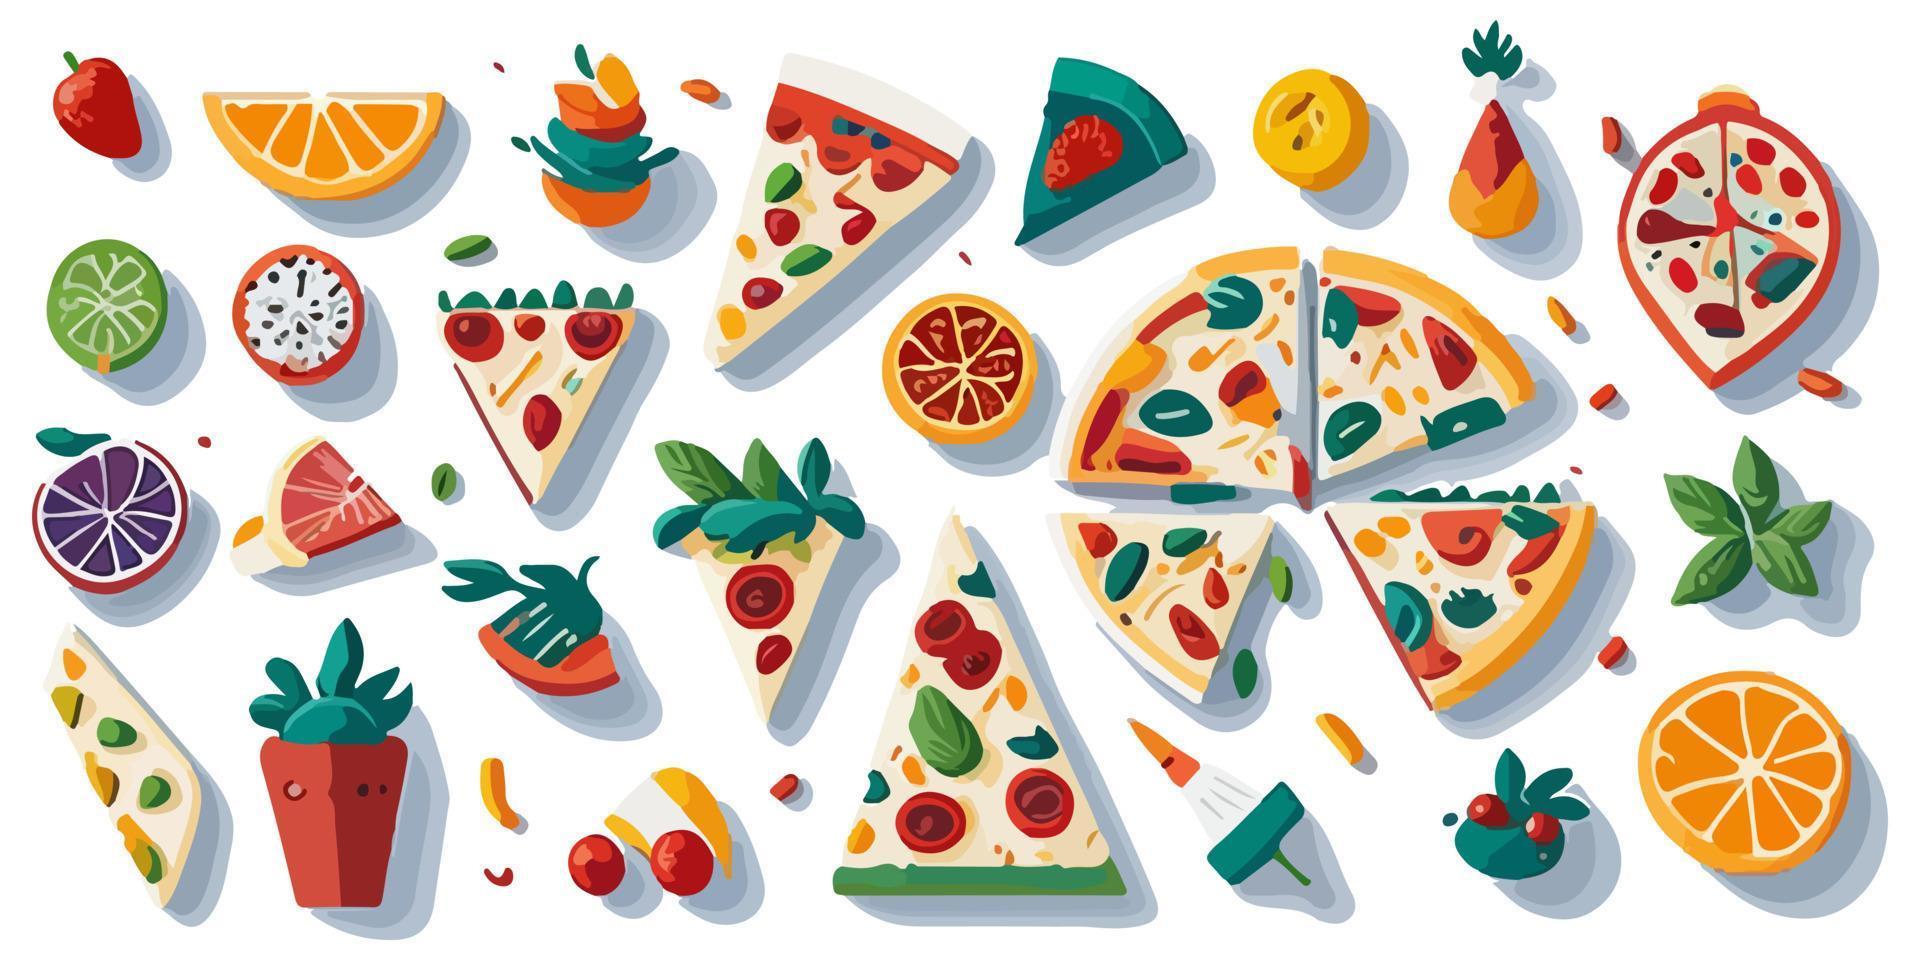 Tasty and Cheesy Flat Vector Illustration of a Pizza Slice